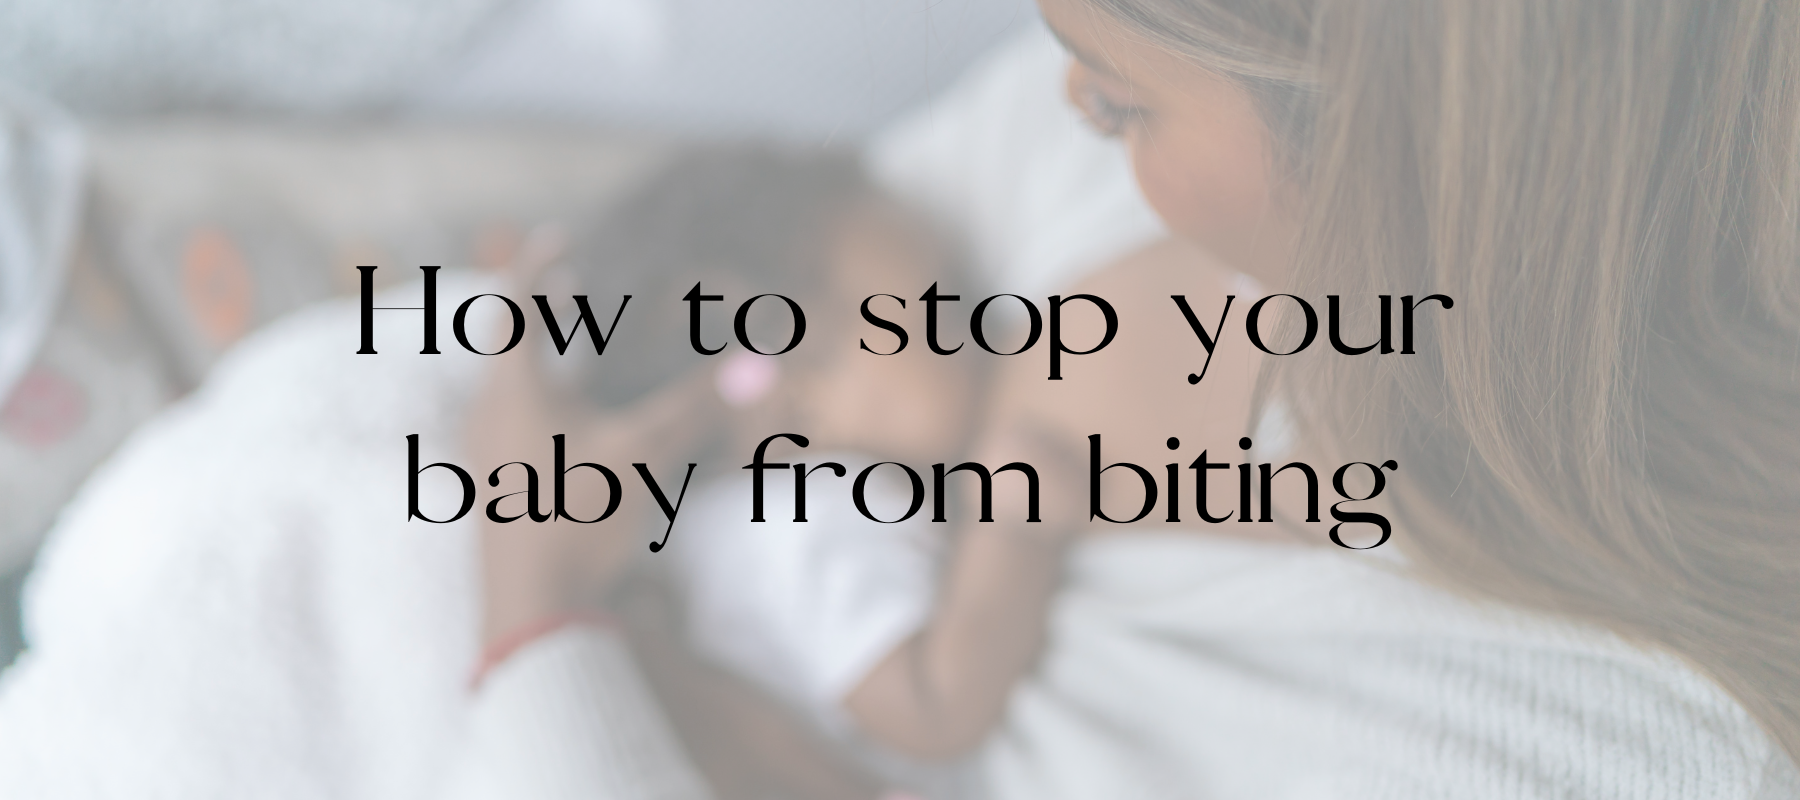 How to stop your baby from biting